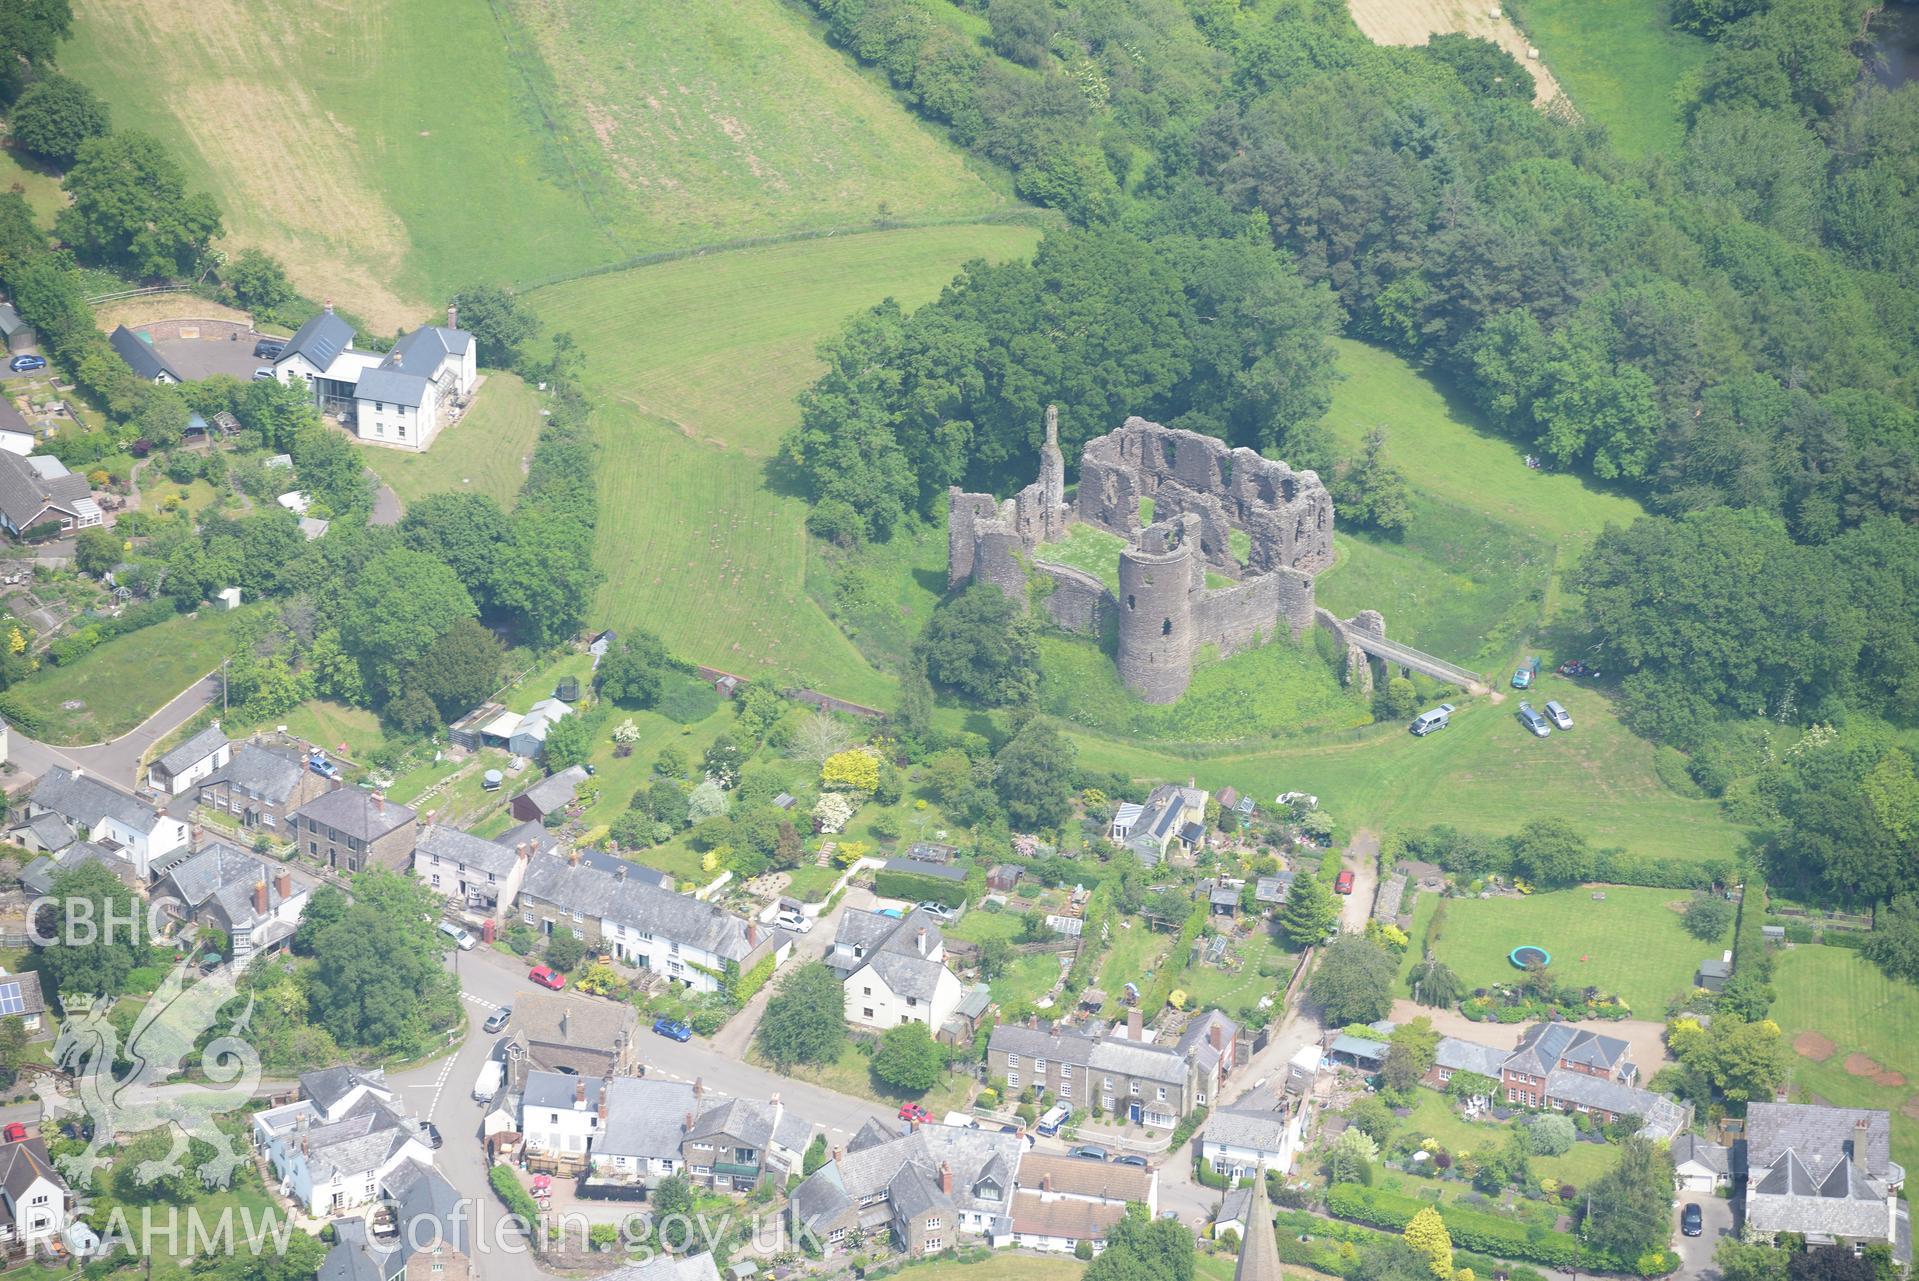 Grosmont village including view of the castle. Oblique aerial photograph taken during the Royal Commission's programme of archaeological aerial reconnaissance by Toby Driver on 11th June 2015.